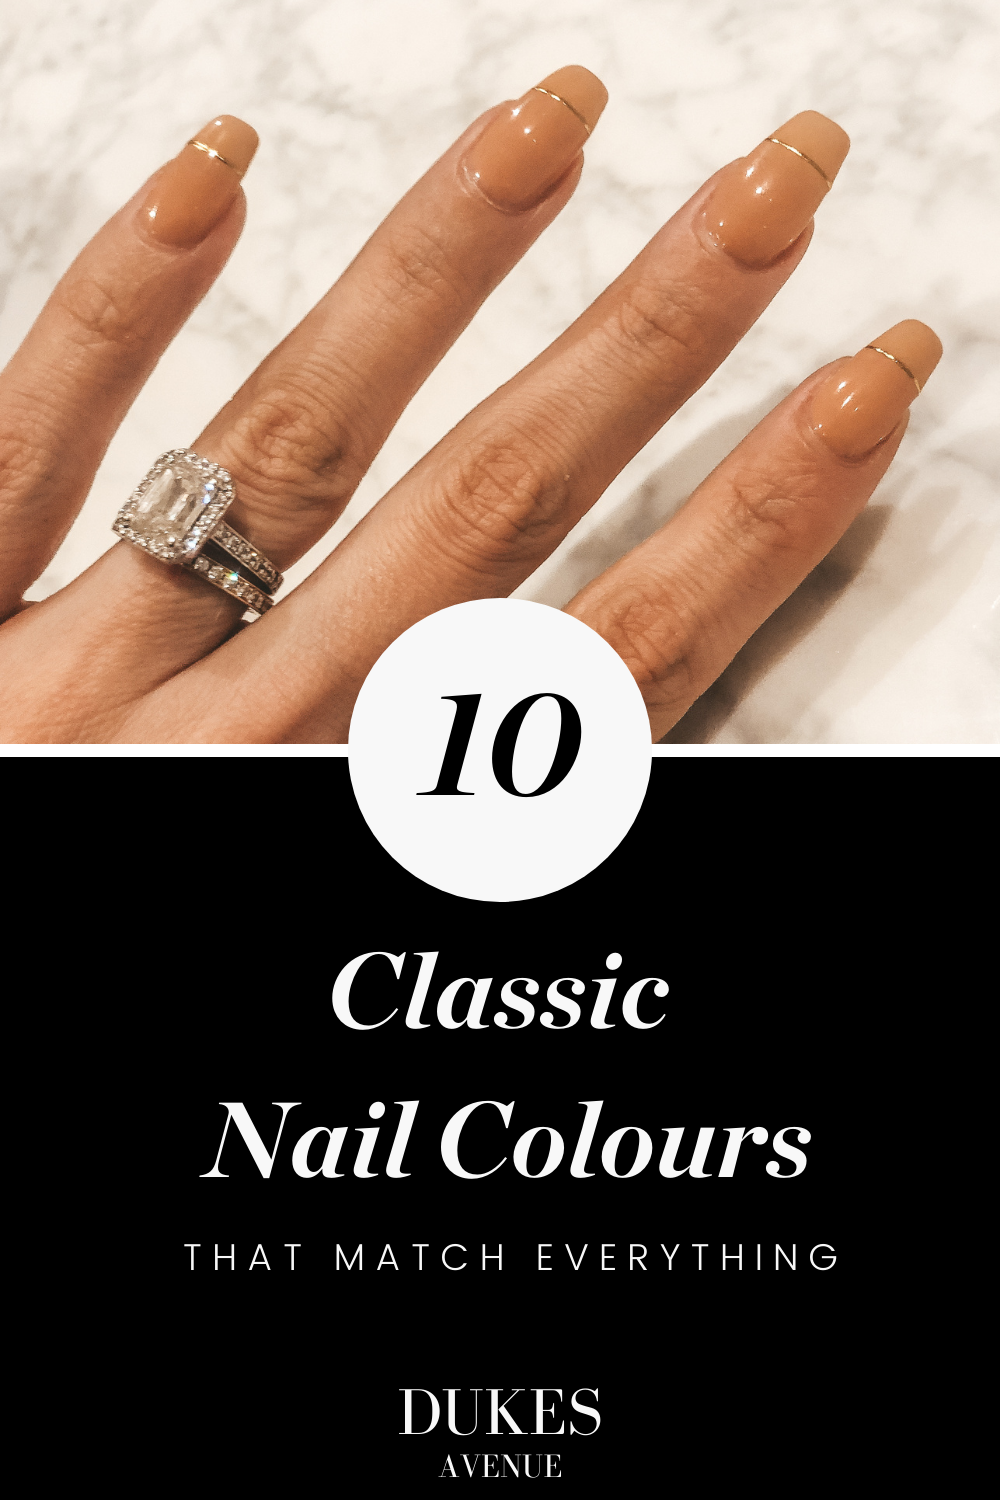 Hand with nude manicure with text overlay of 10 classic nail colours that match everything